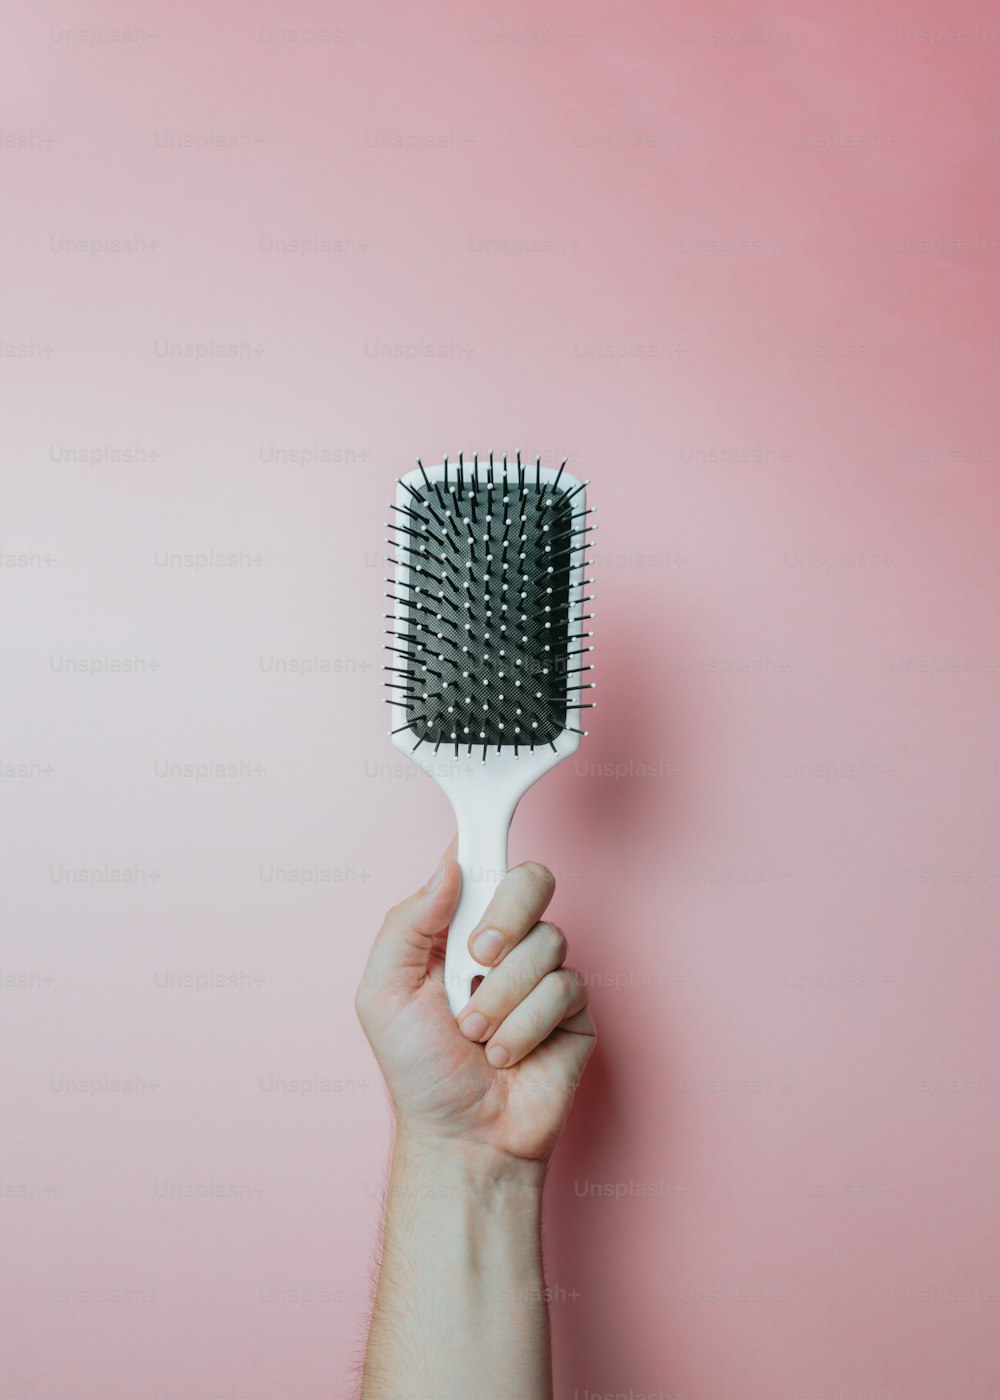 a woman's hand holding a hair brush on a pink background